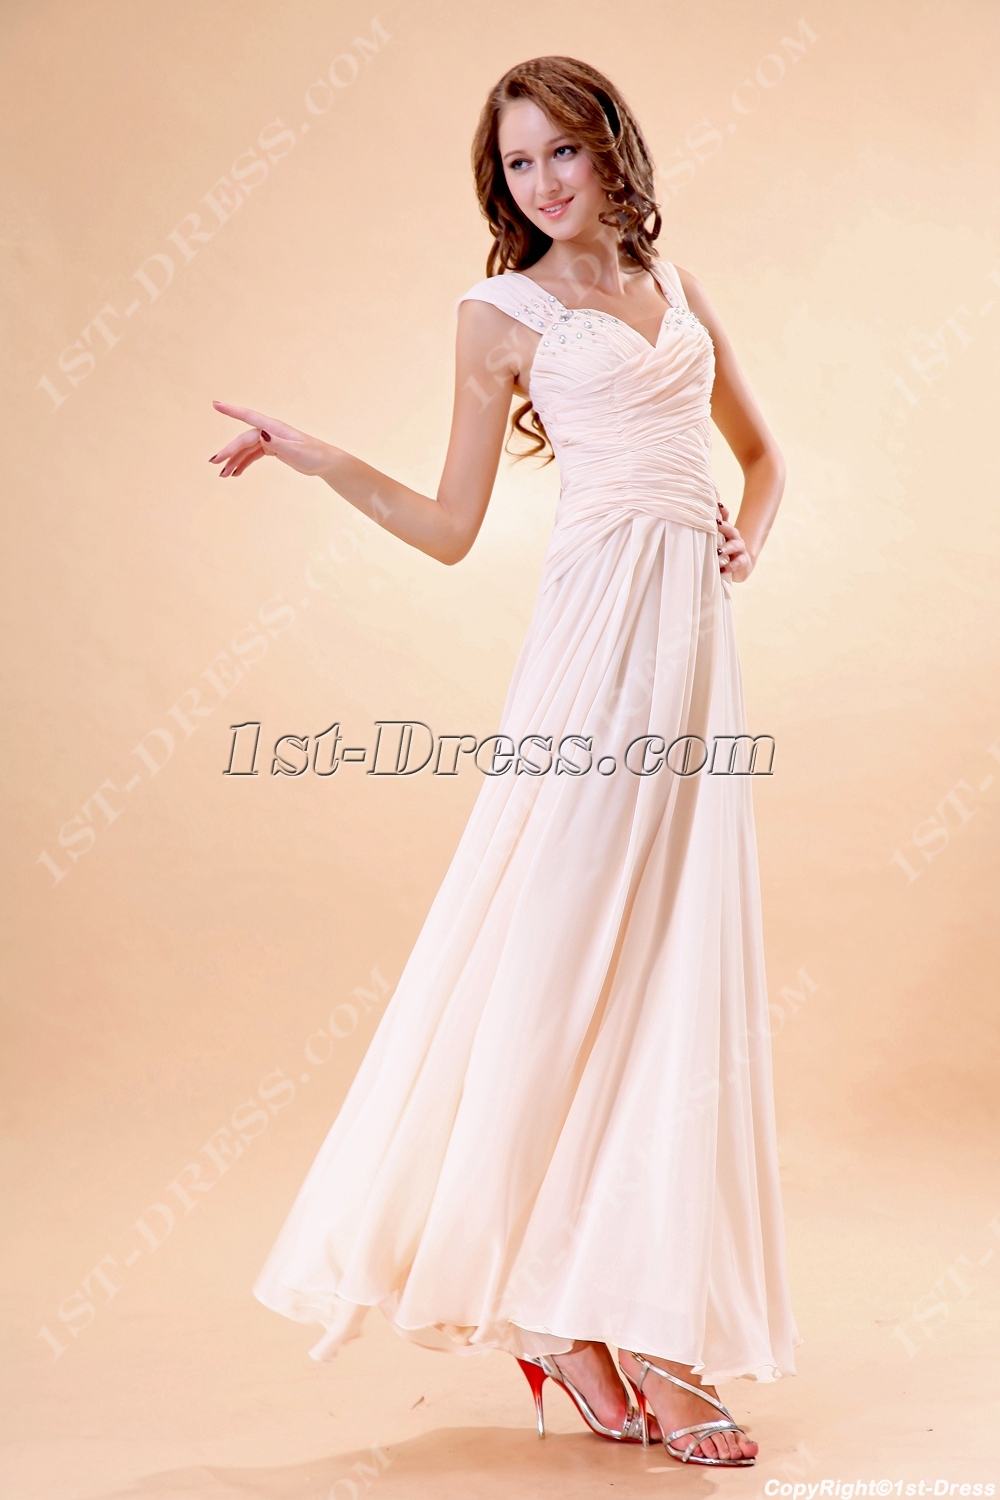 images/201311/big/Champagne-Long-Formal-Evening-Dress-with-Cap-Sleeves-3463-b-1-1384006246.jpg